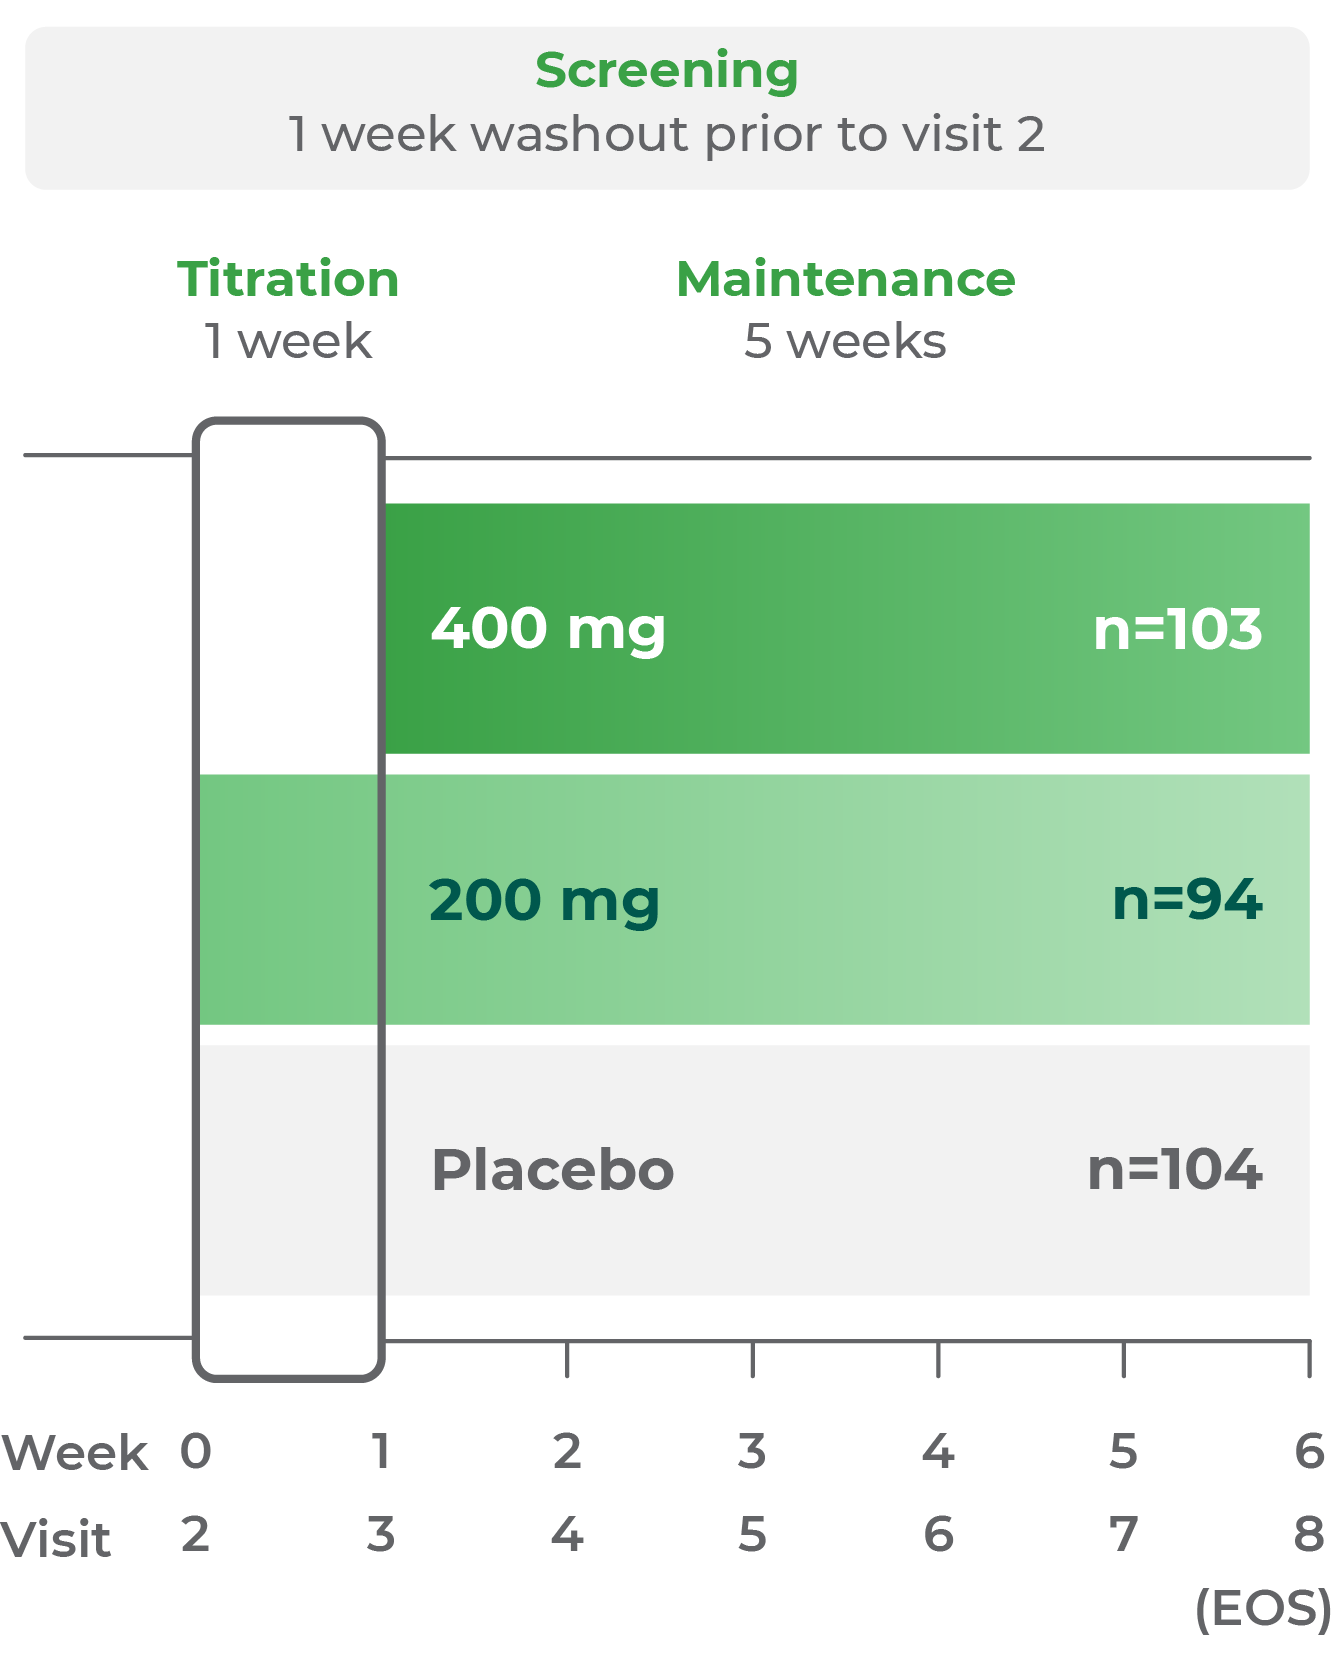 200 mg screening period, 1-week titration,  5-week maintenance in adolescents for 200 mg, 400 mg, and placebo doses over a 6-week period